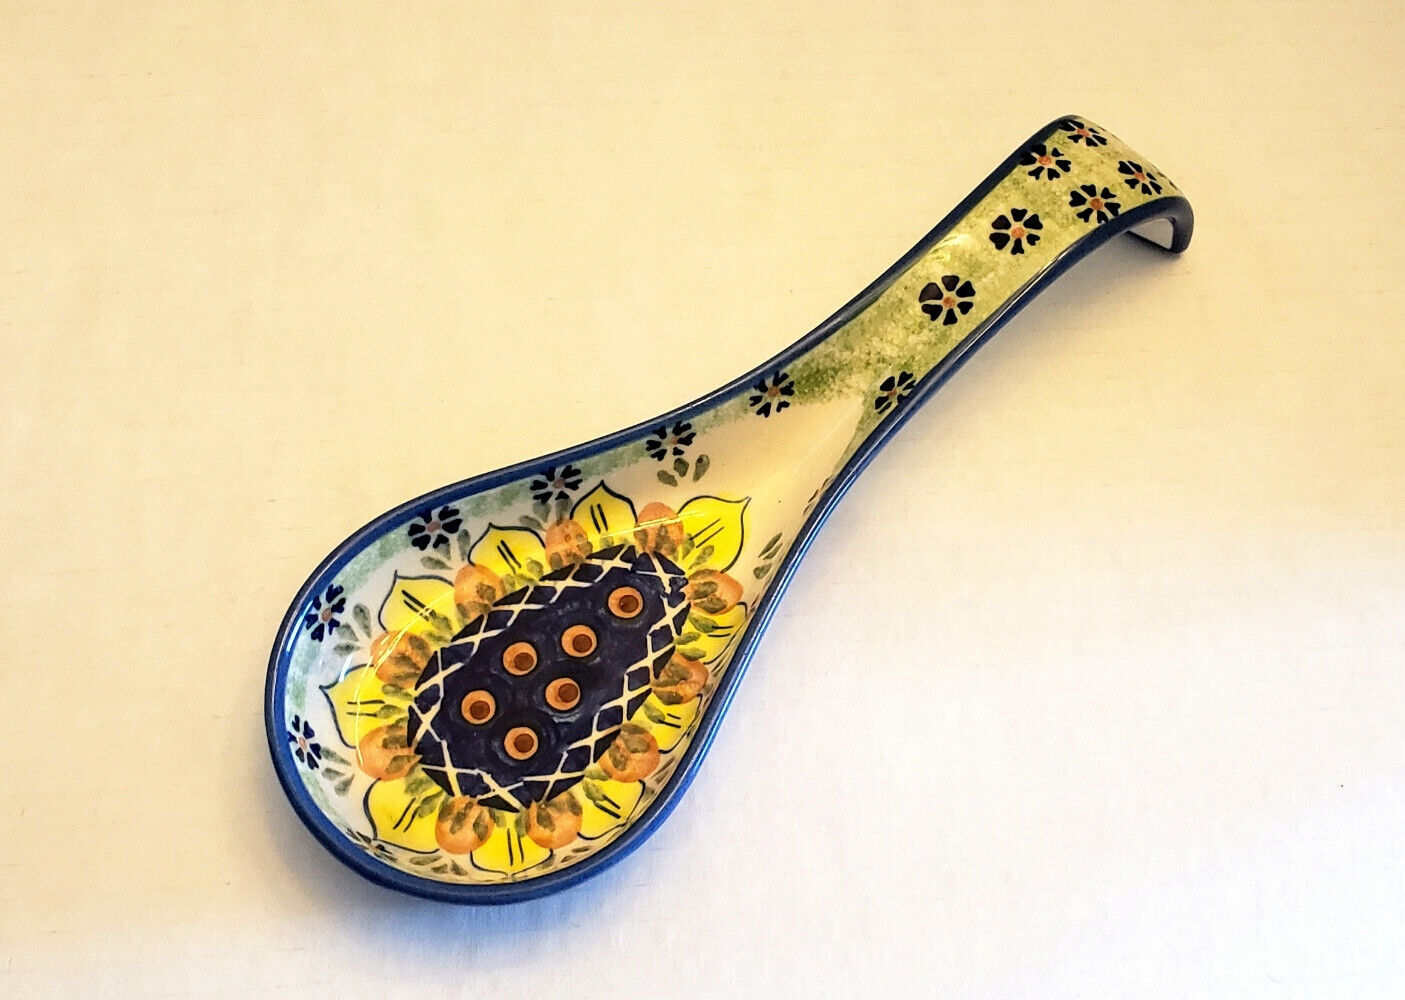 Vingage Hand Made in Poland Pottery Boleslawier Spoon Rest / Holder  11”x4” ㄱ